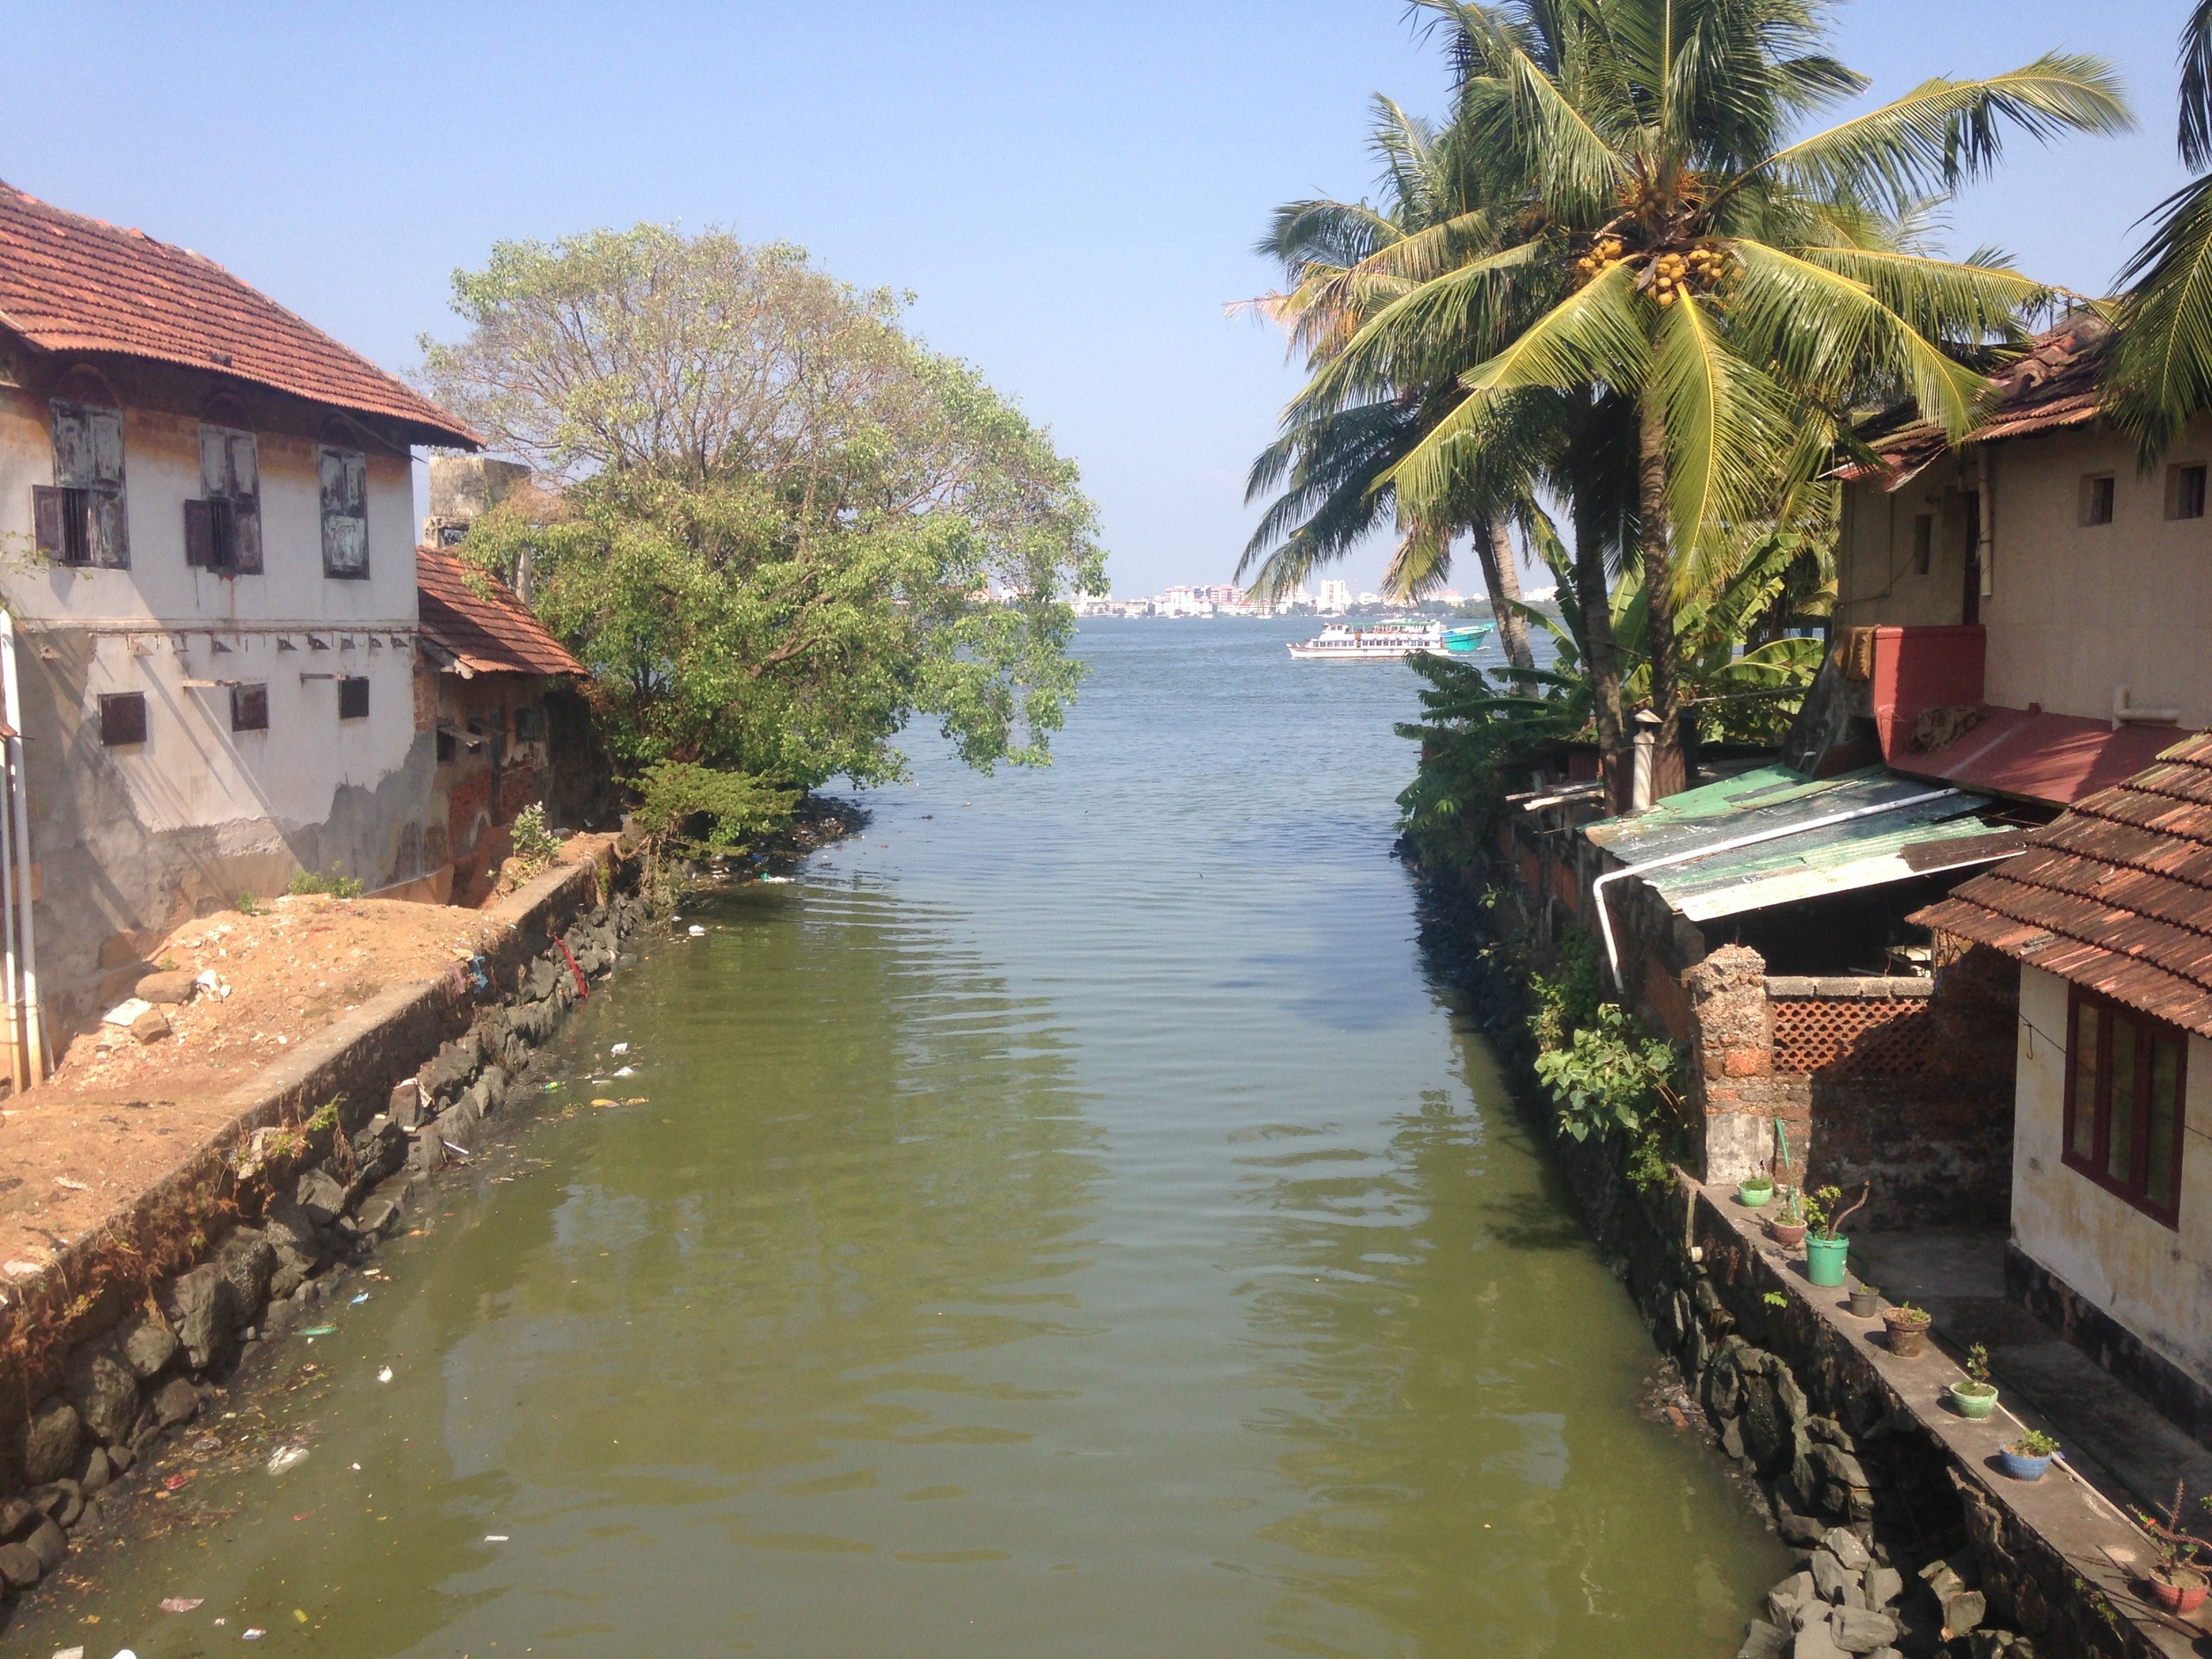  The view from Fort Kochi looking at downtown across the water. 